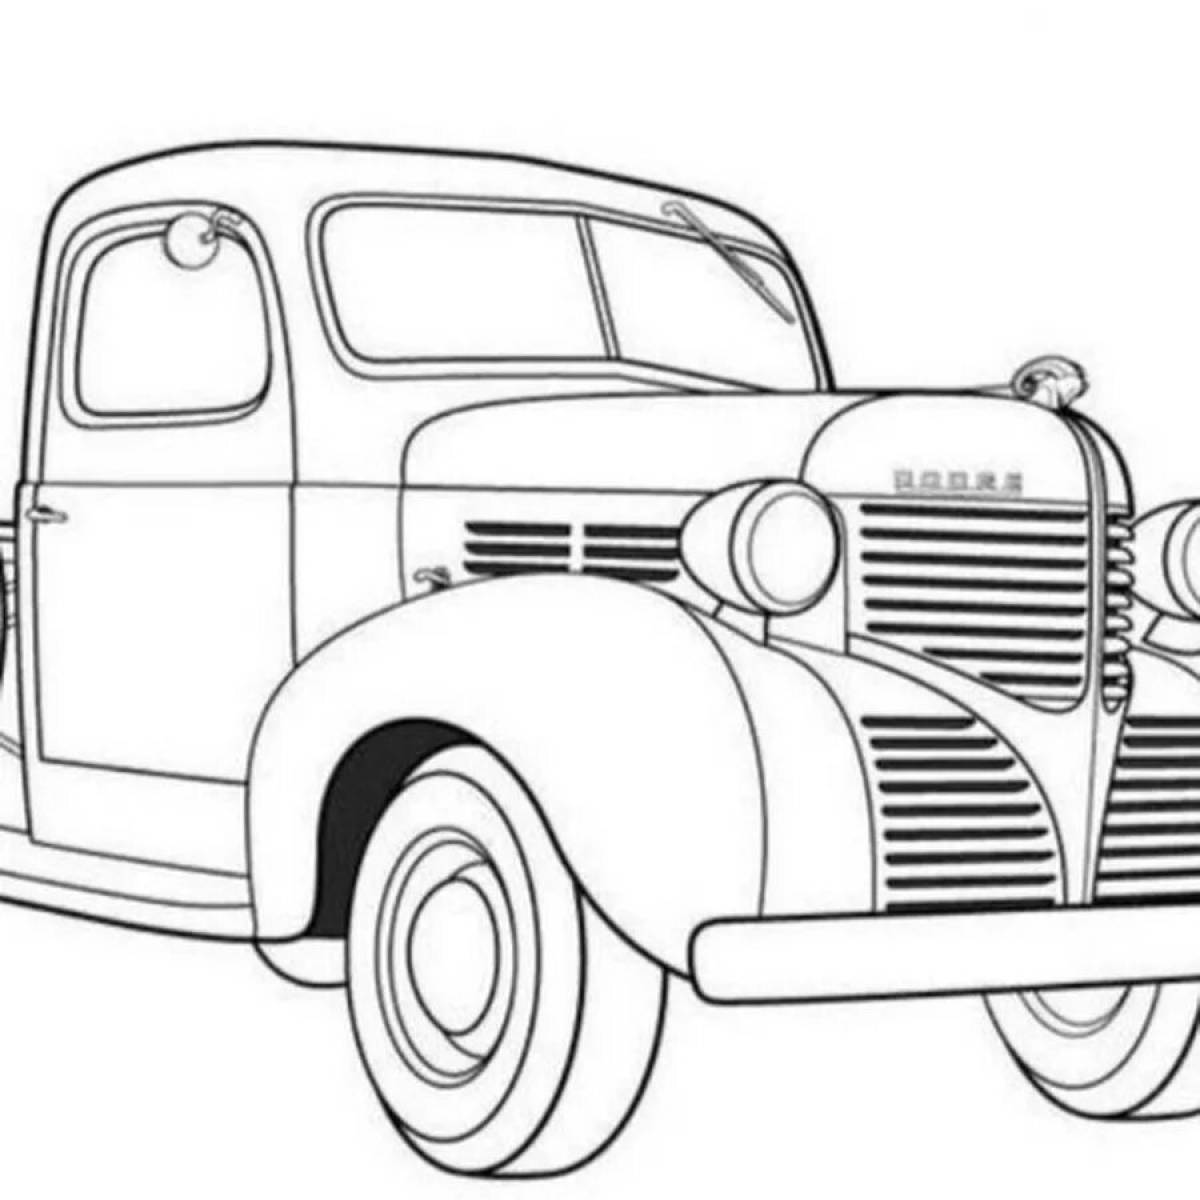 Nice truck coloring book for kids